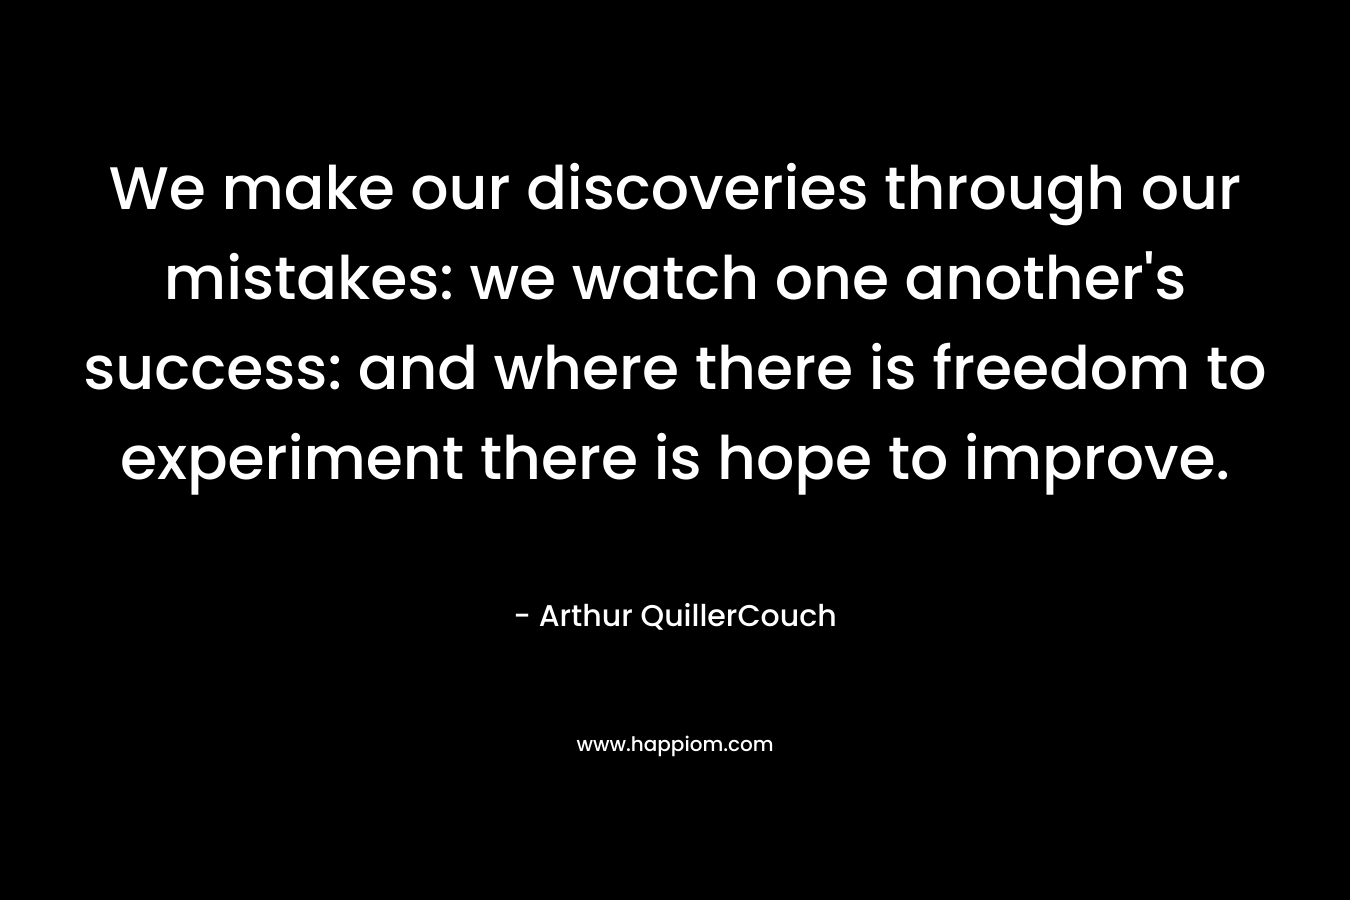 We make our discoveries through our mistakes: we watch one another’s success: and where there is freedom to experiment there is hope to improve. – Arthur QuillerCouch